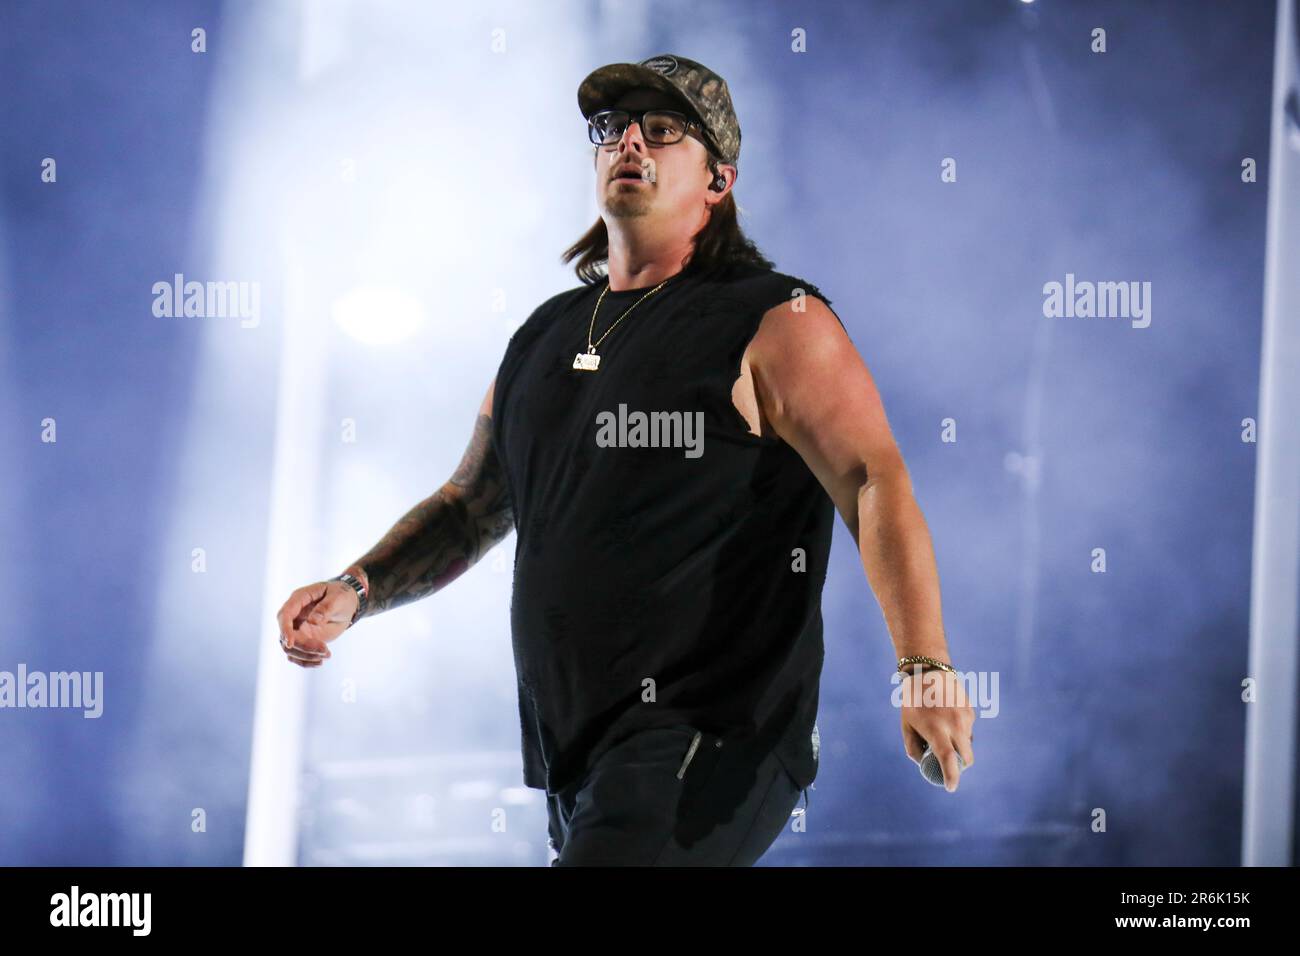 Nashville, USA. 09th June, 2023. HARDY performs on stage at the CMA Festival at Nissan Stadium in Nashville, TN on June 9, 2023. (Photo by Justin Renfroe/Sipa USA) Credit: Sipa USA/Alamy Live News Stock Photo